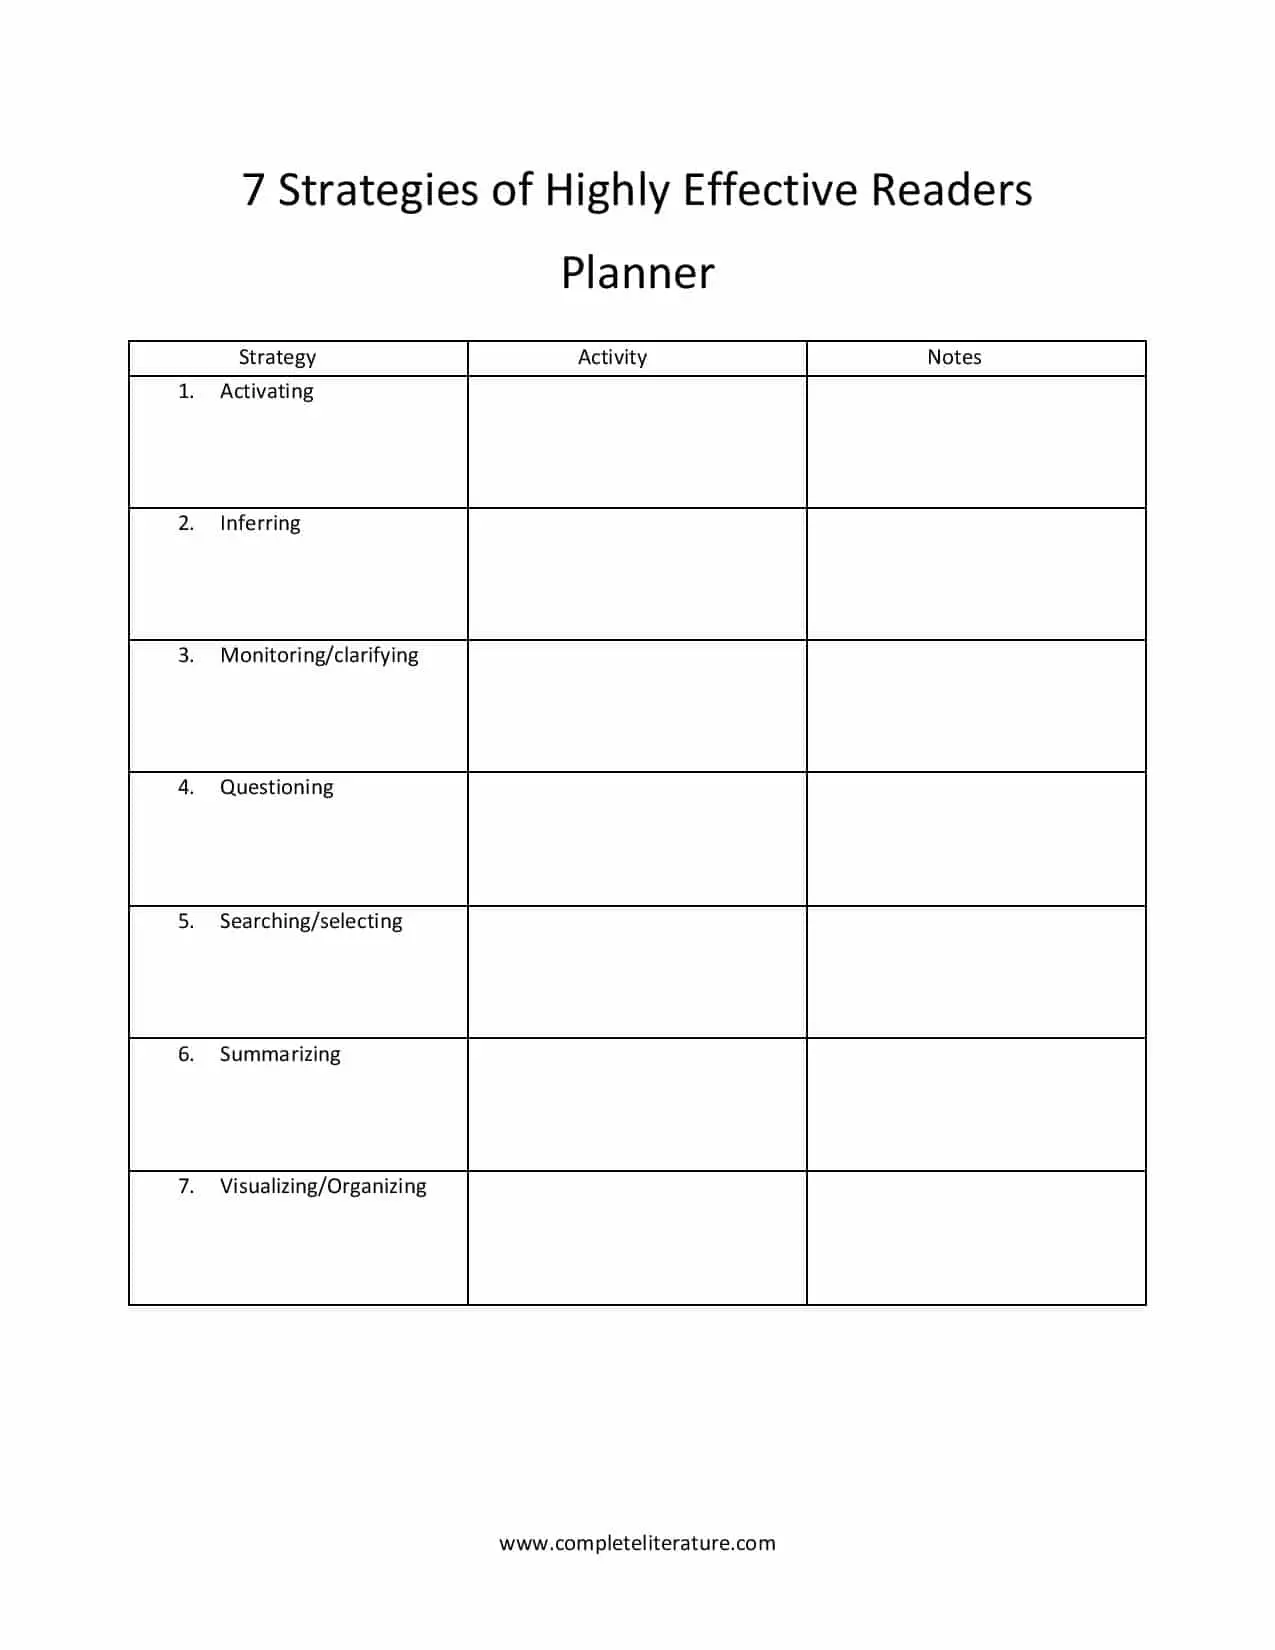 Strategies of Highly effective students